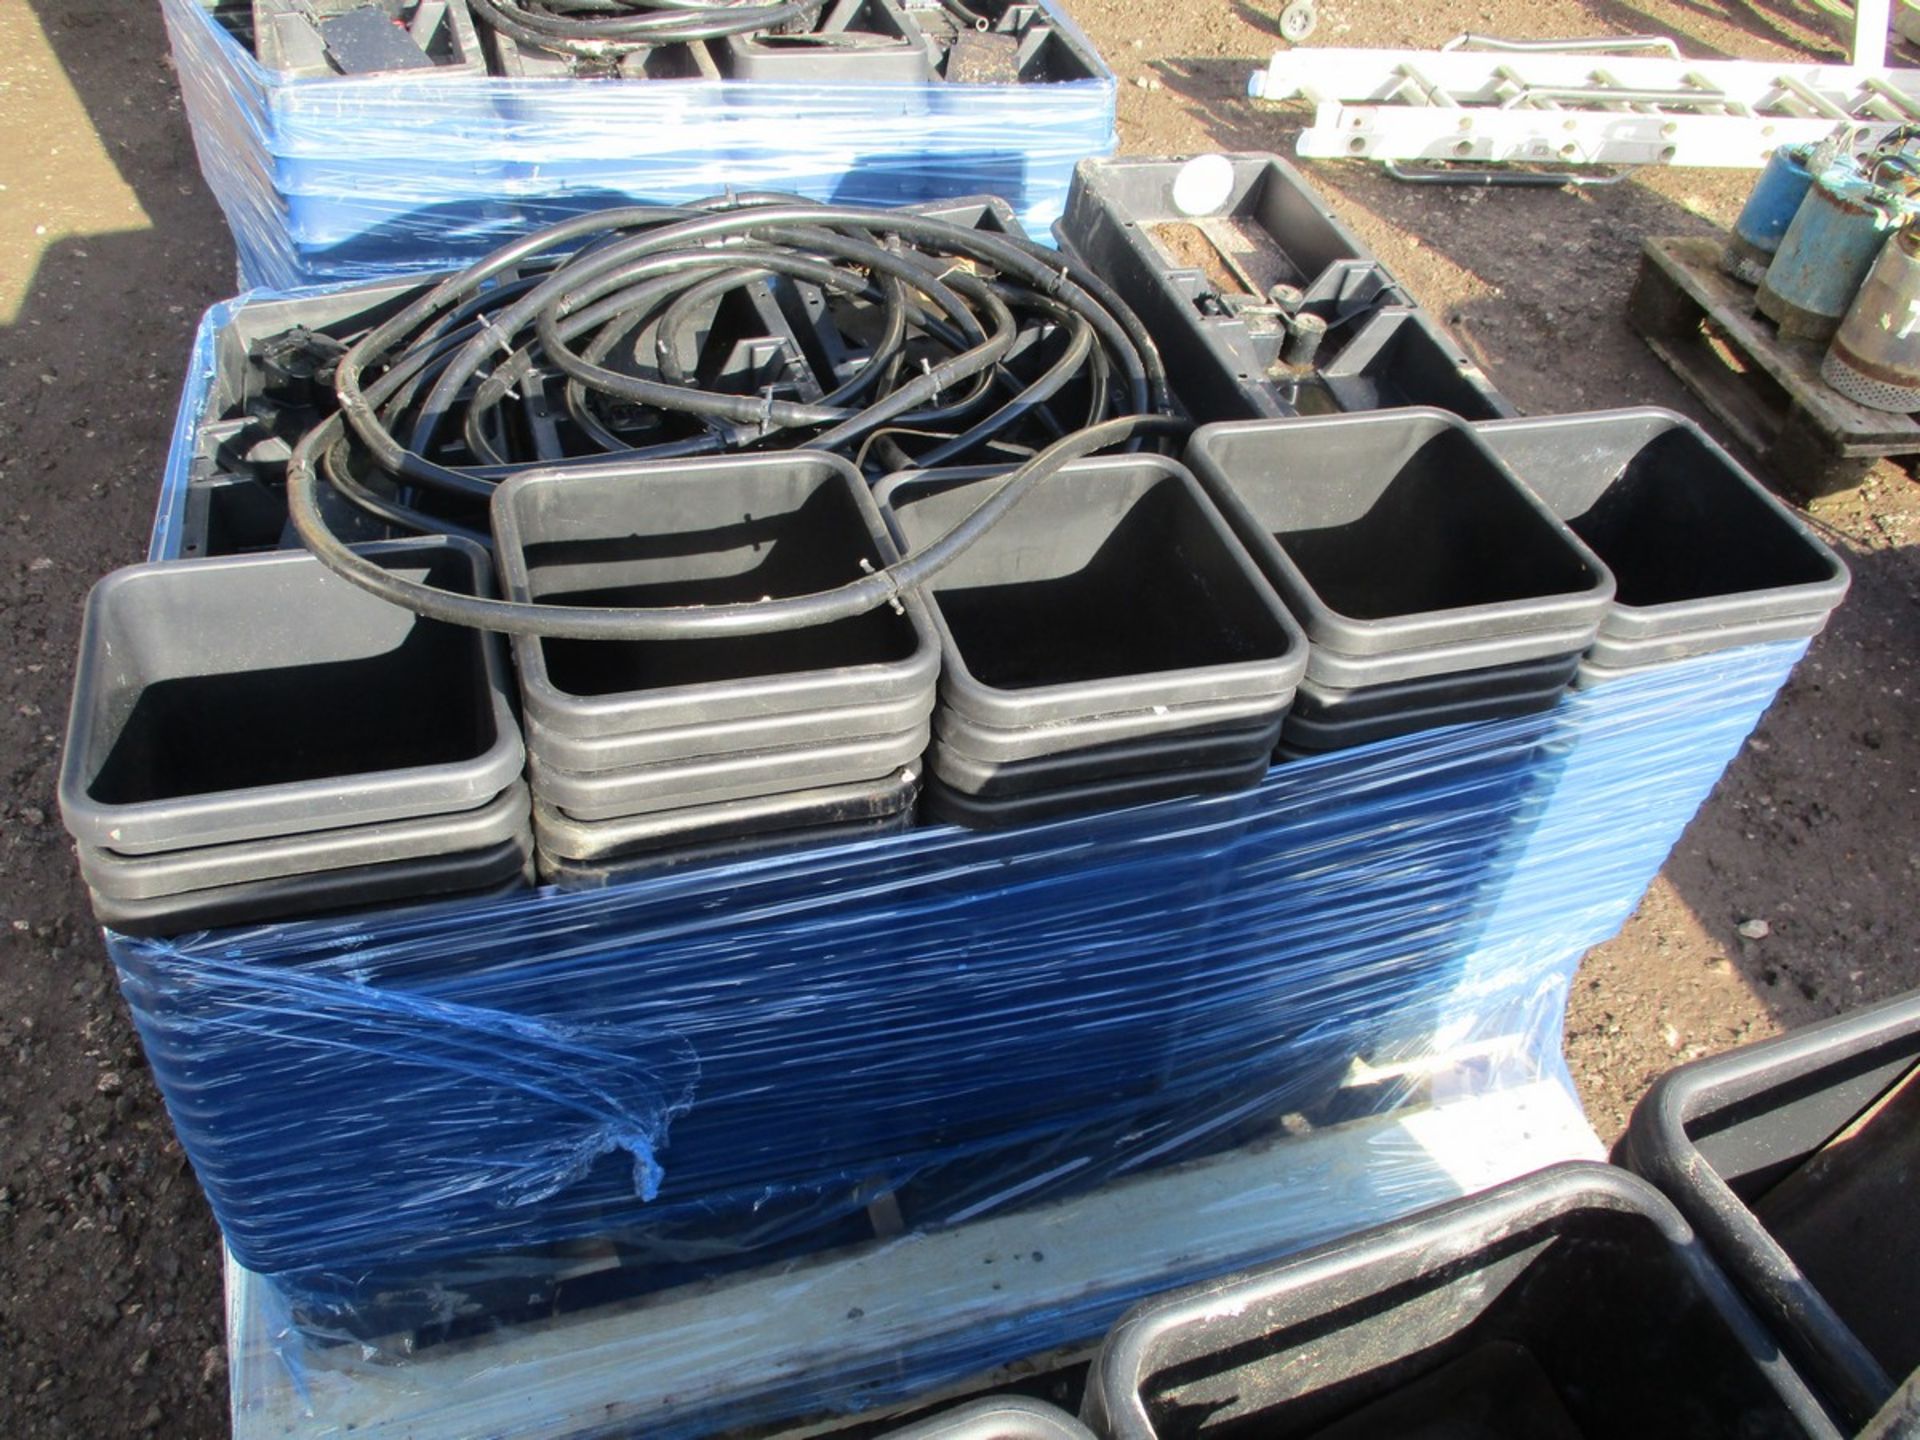 AUTO POTS 40 TRAYS 80 POTS C.W PIPEWORK 8.5 LITRE POTS TRAYS WITH FLOATS (NEW PRICE £450)